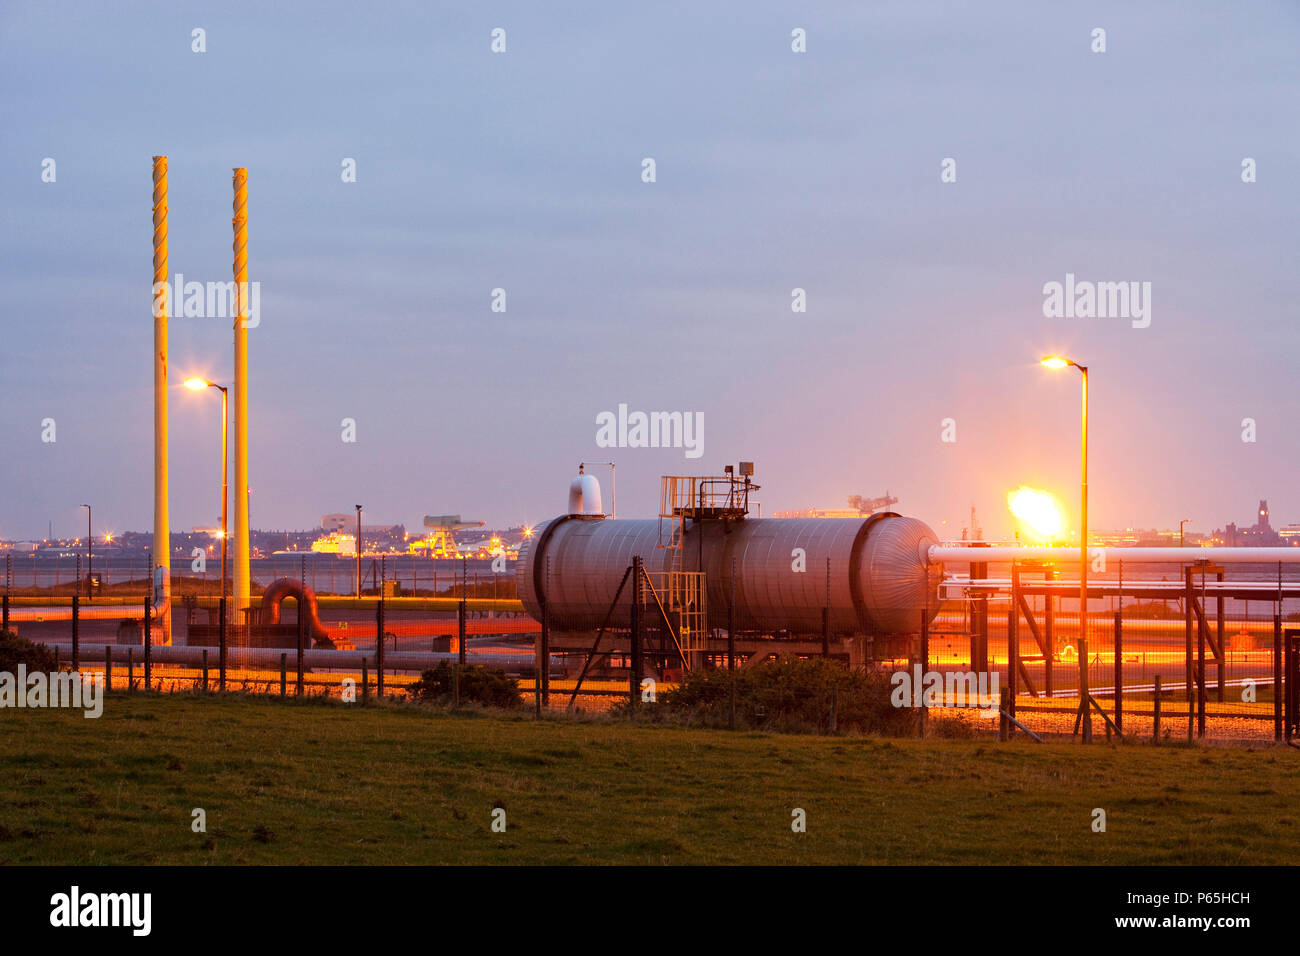 Gas being flared off at Centrica's gas plant in Barrow in Furness. This plant processes gas from the Morecambe bay gas field, Cumbria, UK. Stock Photo